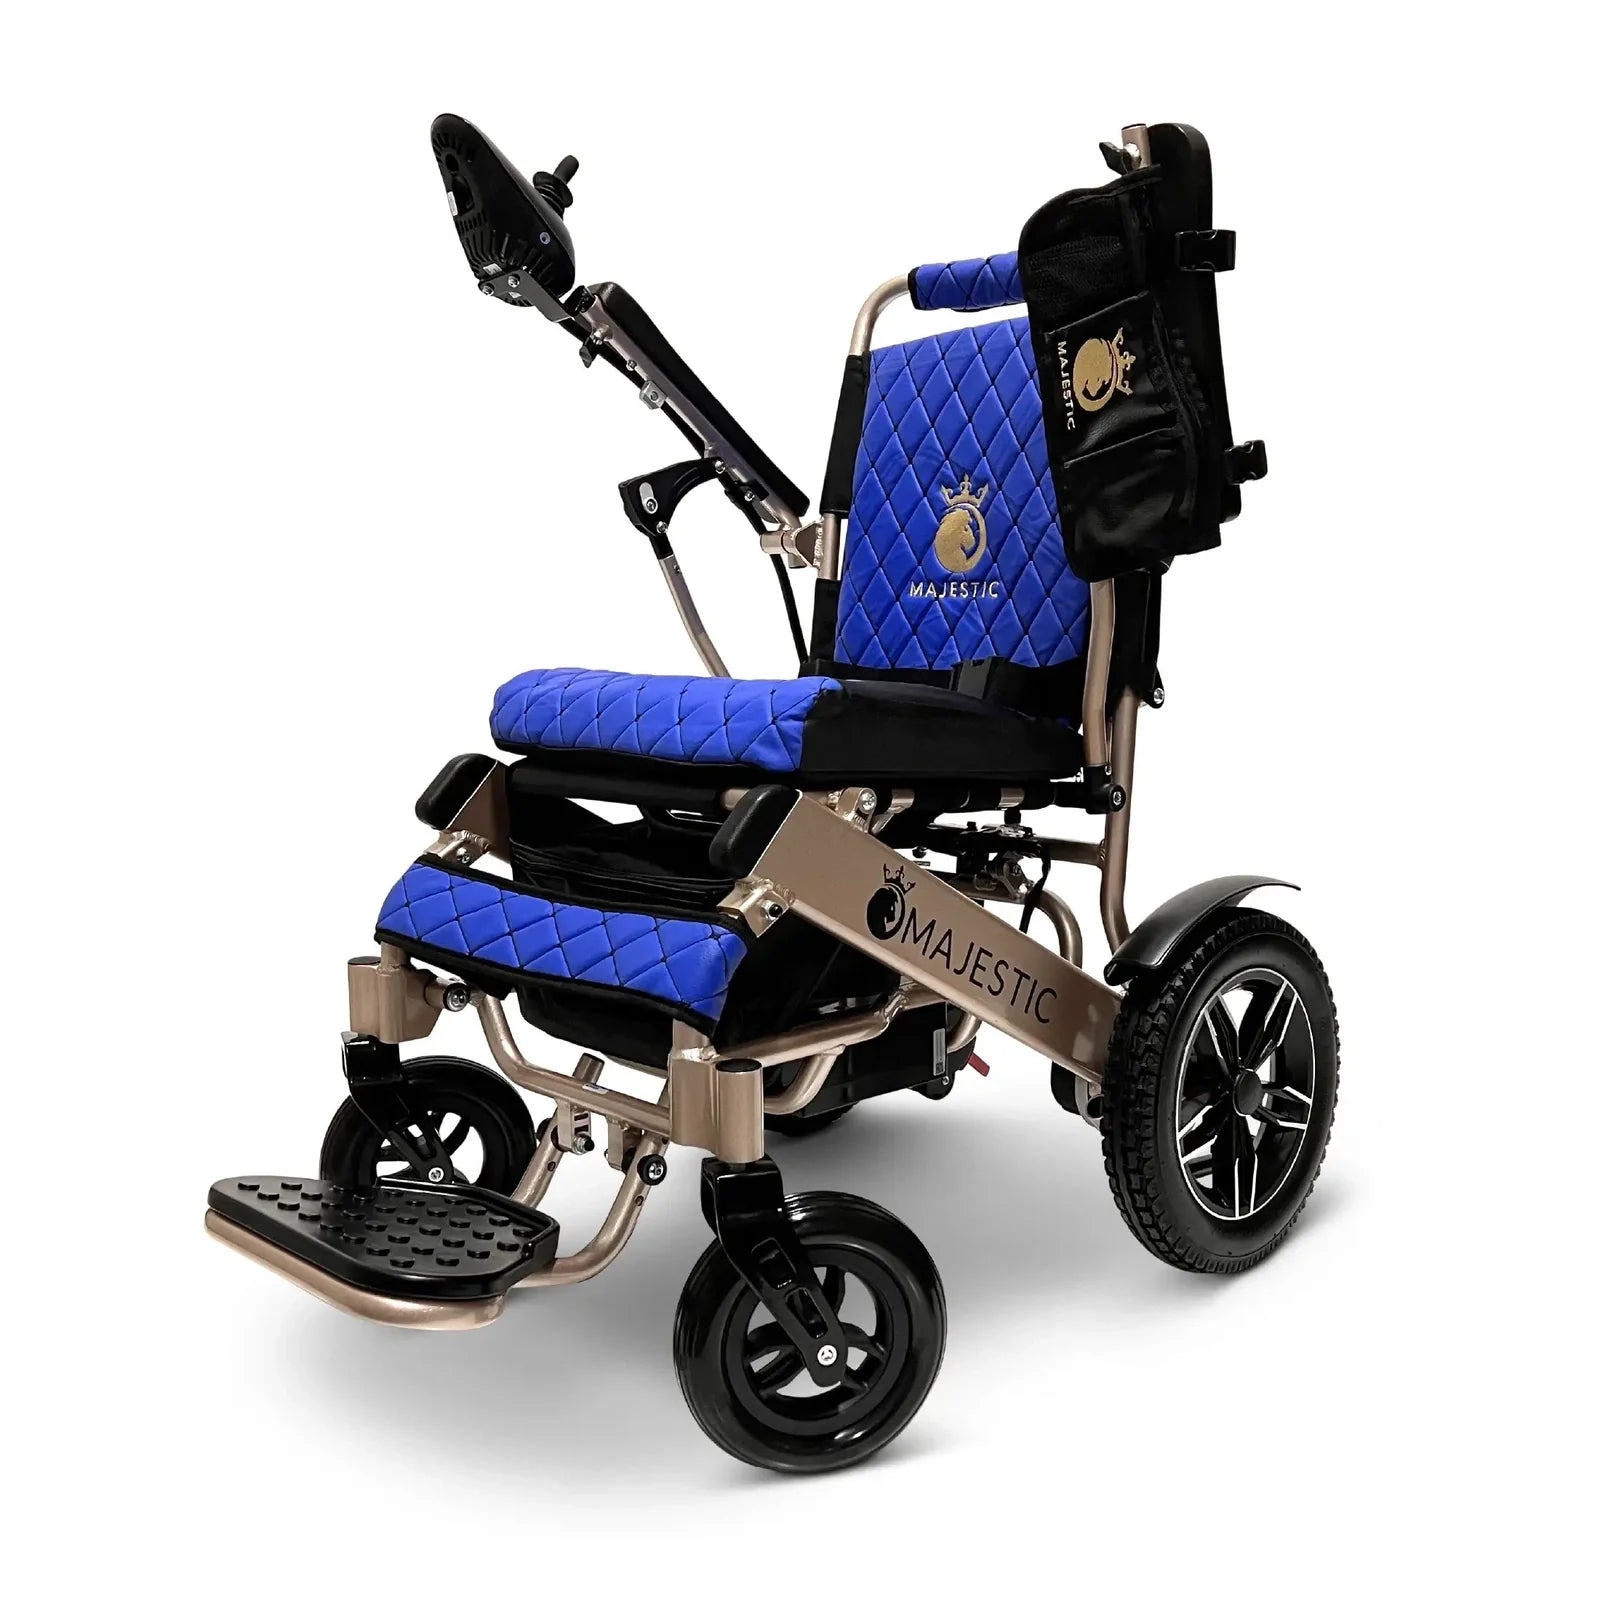 ComfyGO Majestic IQ-8000 Remote Controlled Lightweight Folding Electric Wheelchair Power Wheelchairs ComfyGO Bronze Blue 10 Miles & 17.5" Seat Width